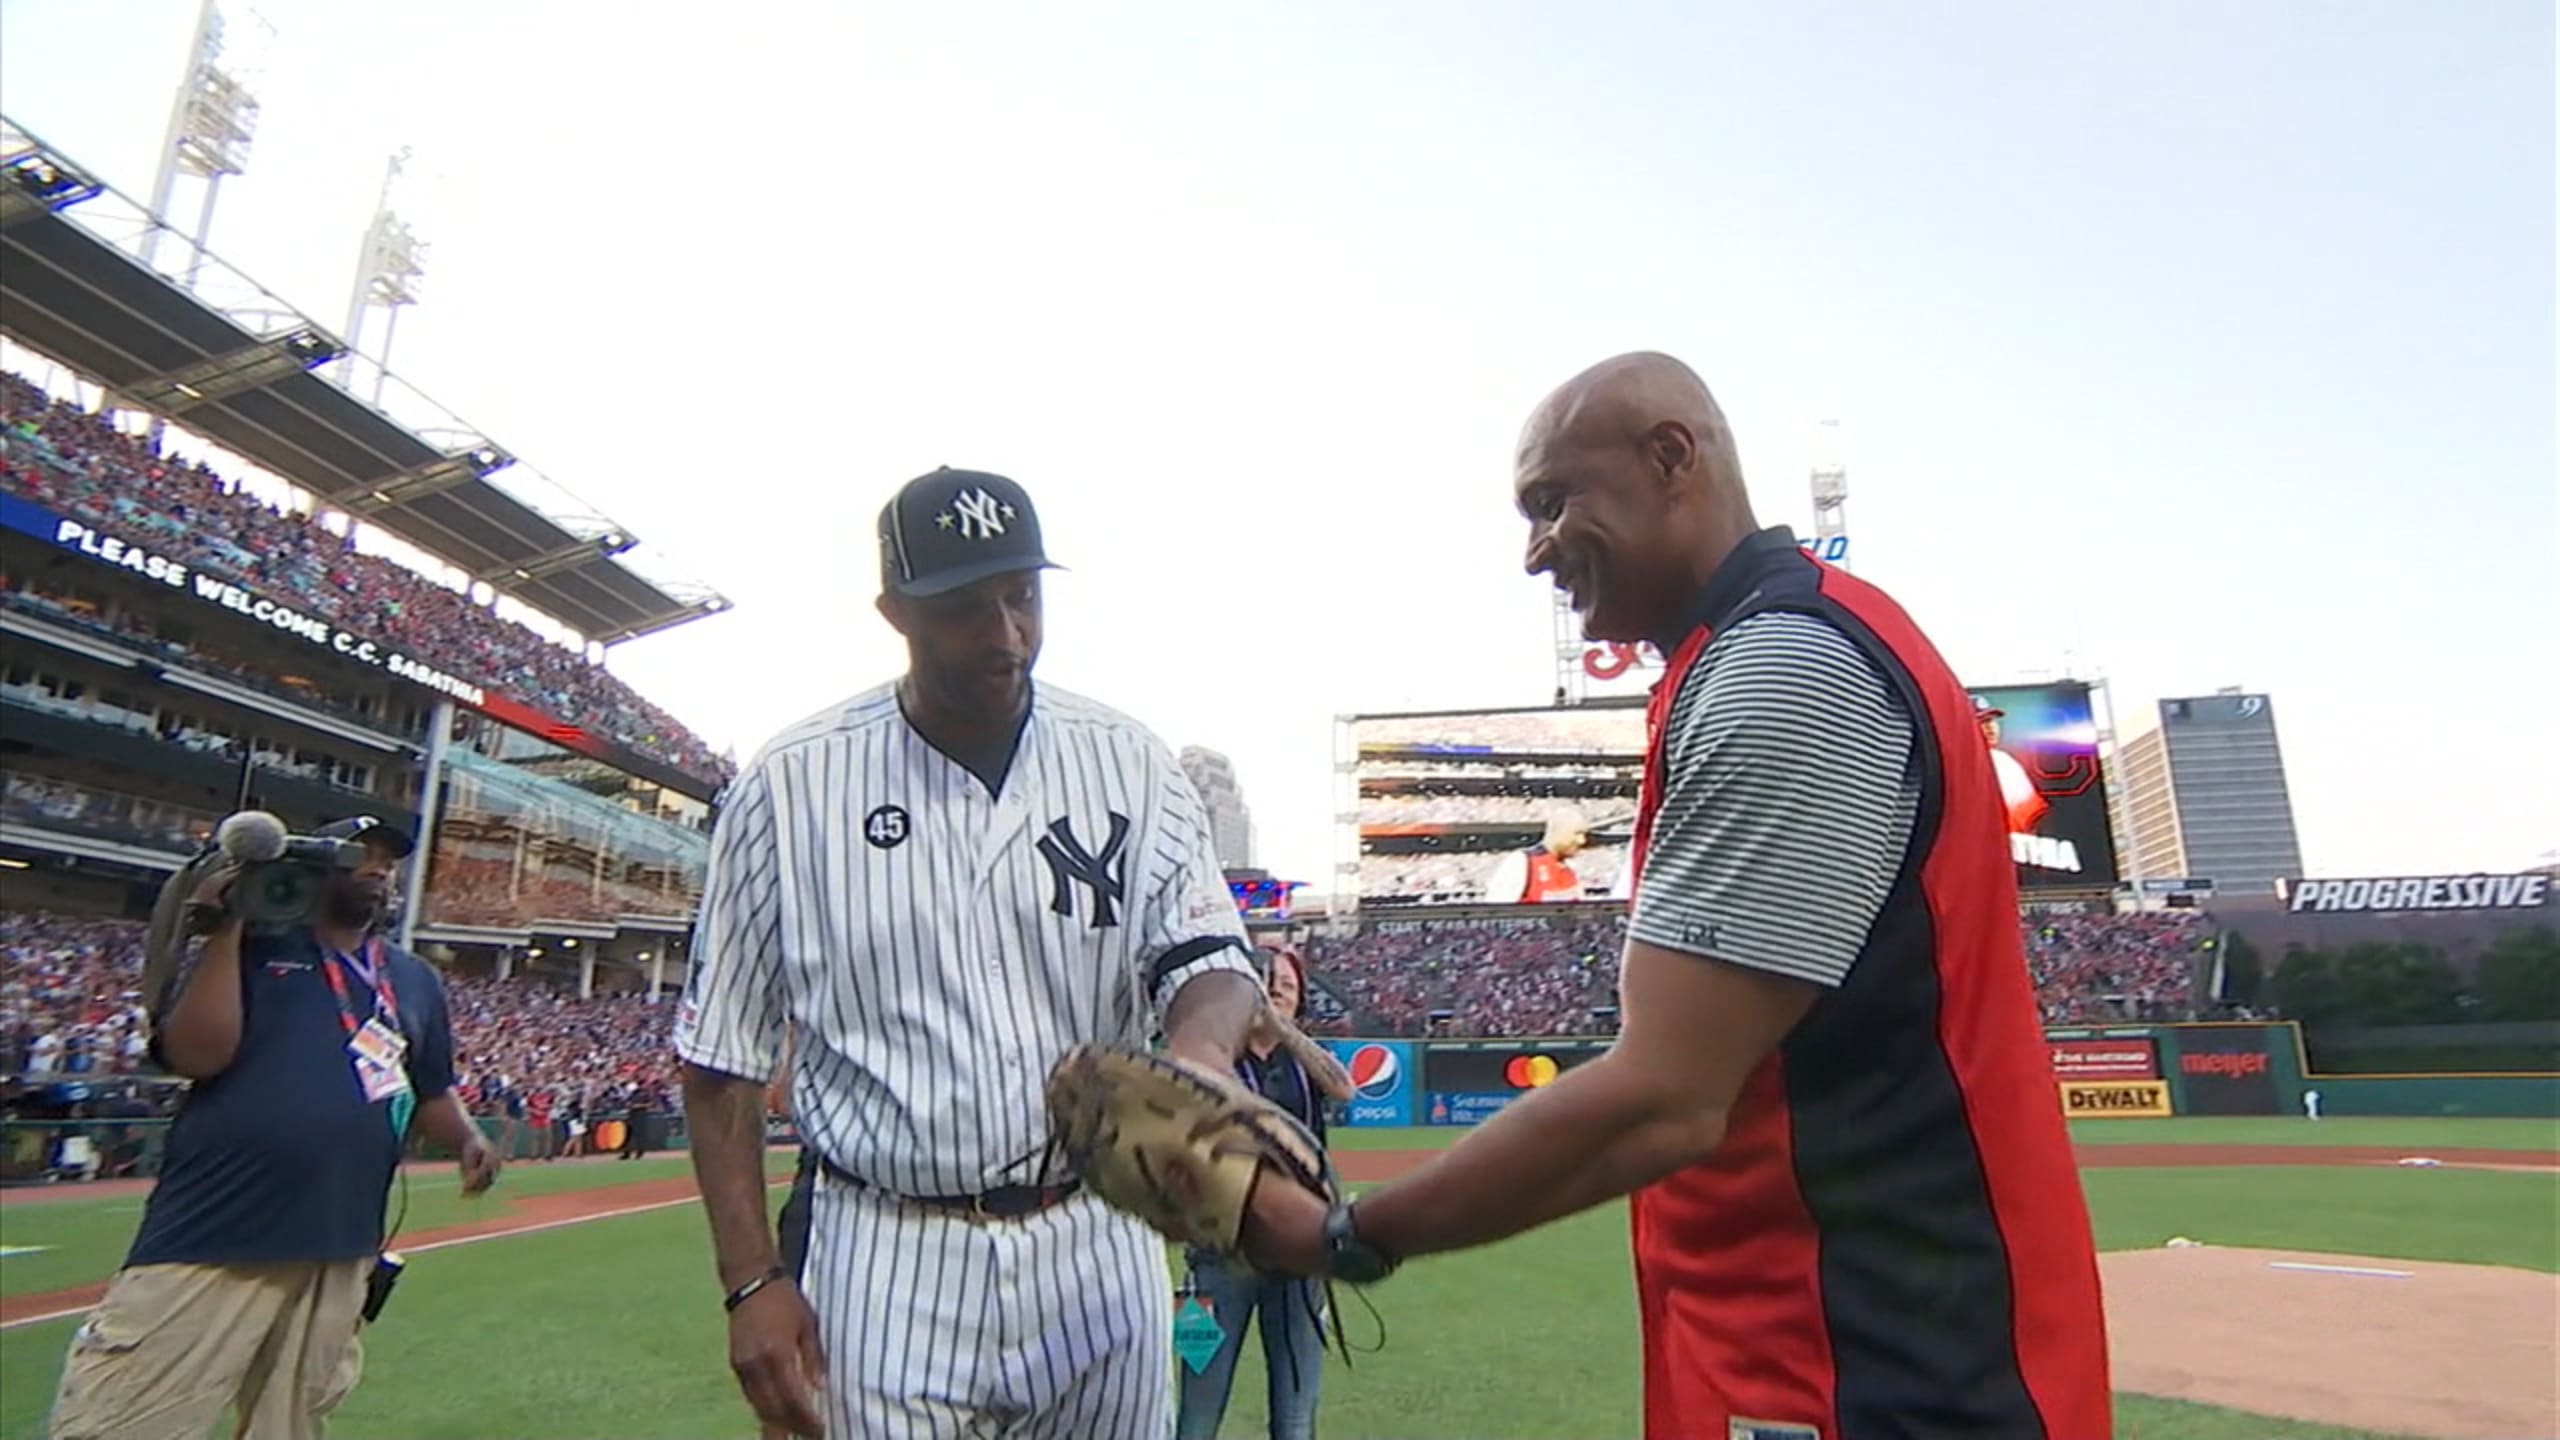 Watch: CC Sabathia throws out first pitch at 2019 MLB All-Star